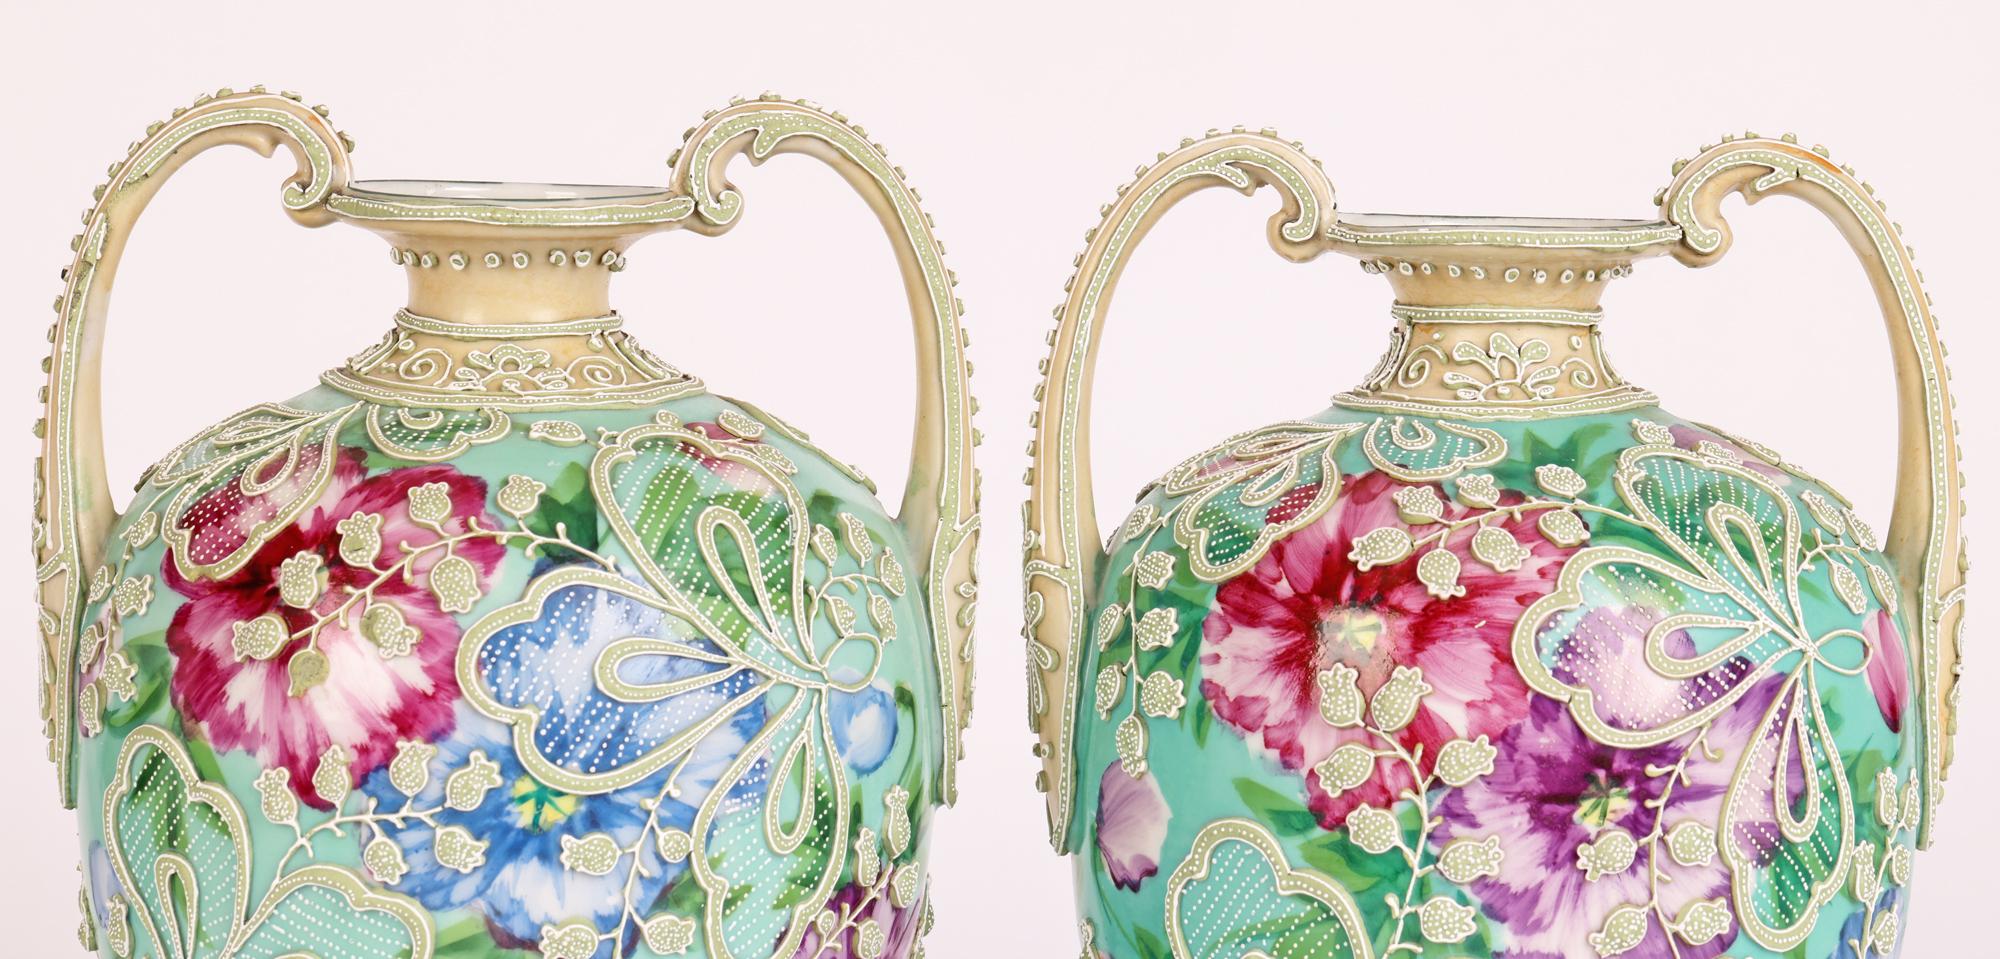 An exceptional pair Japanese Meiji twin handled decorated with moriage patterning on a floral painted ground dating from around 1900. The porcelain vases stand on a shaped round foot with a narrow stem and large round bulbous body with a narrow neck